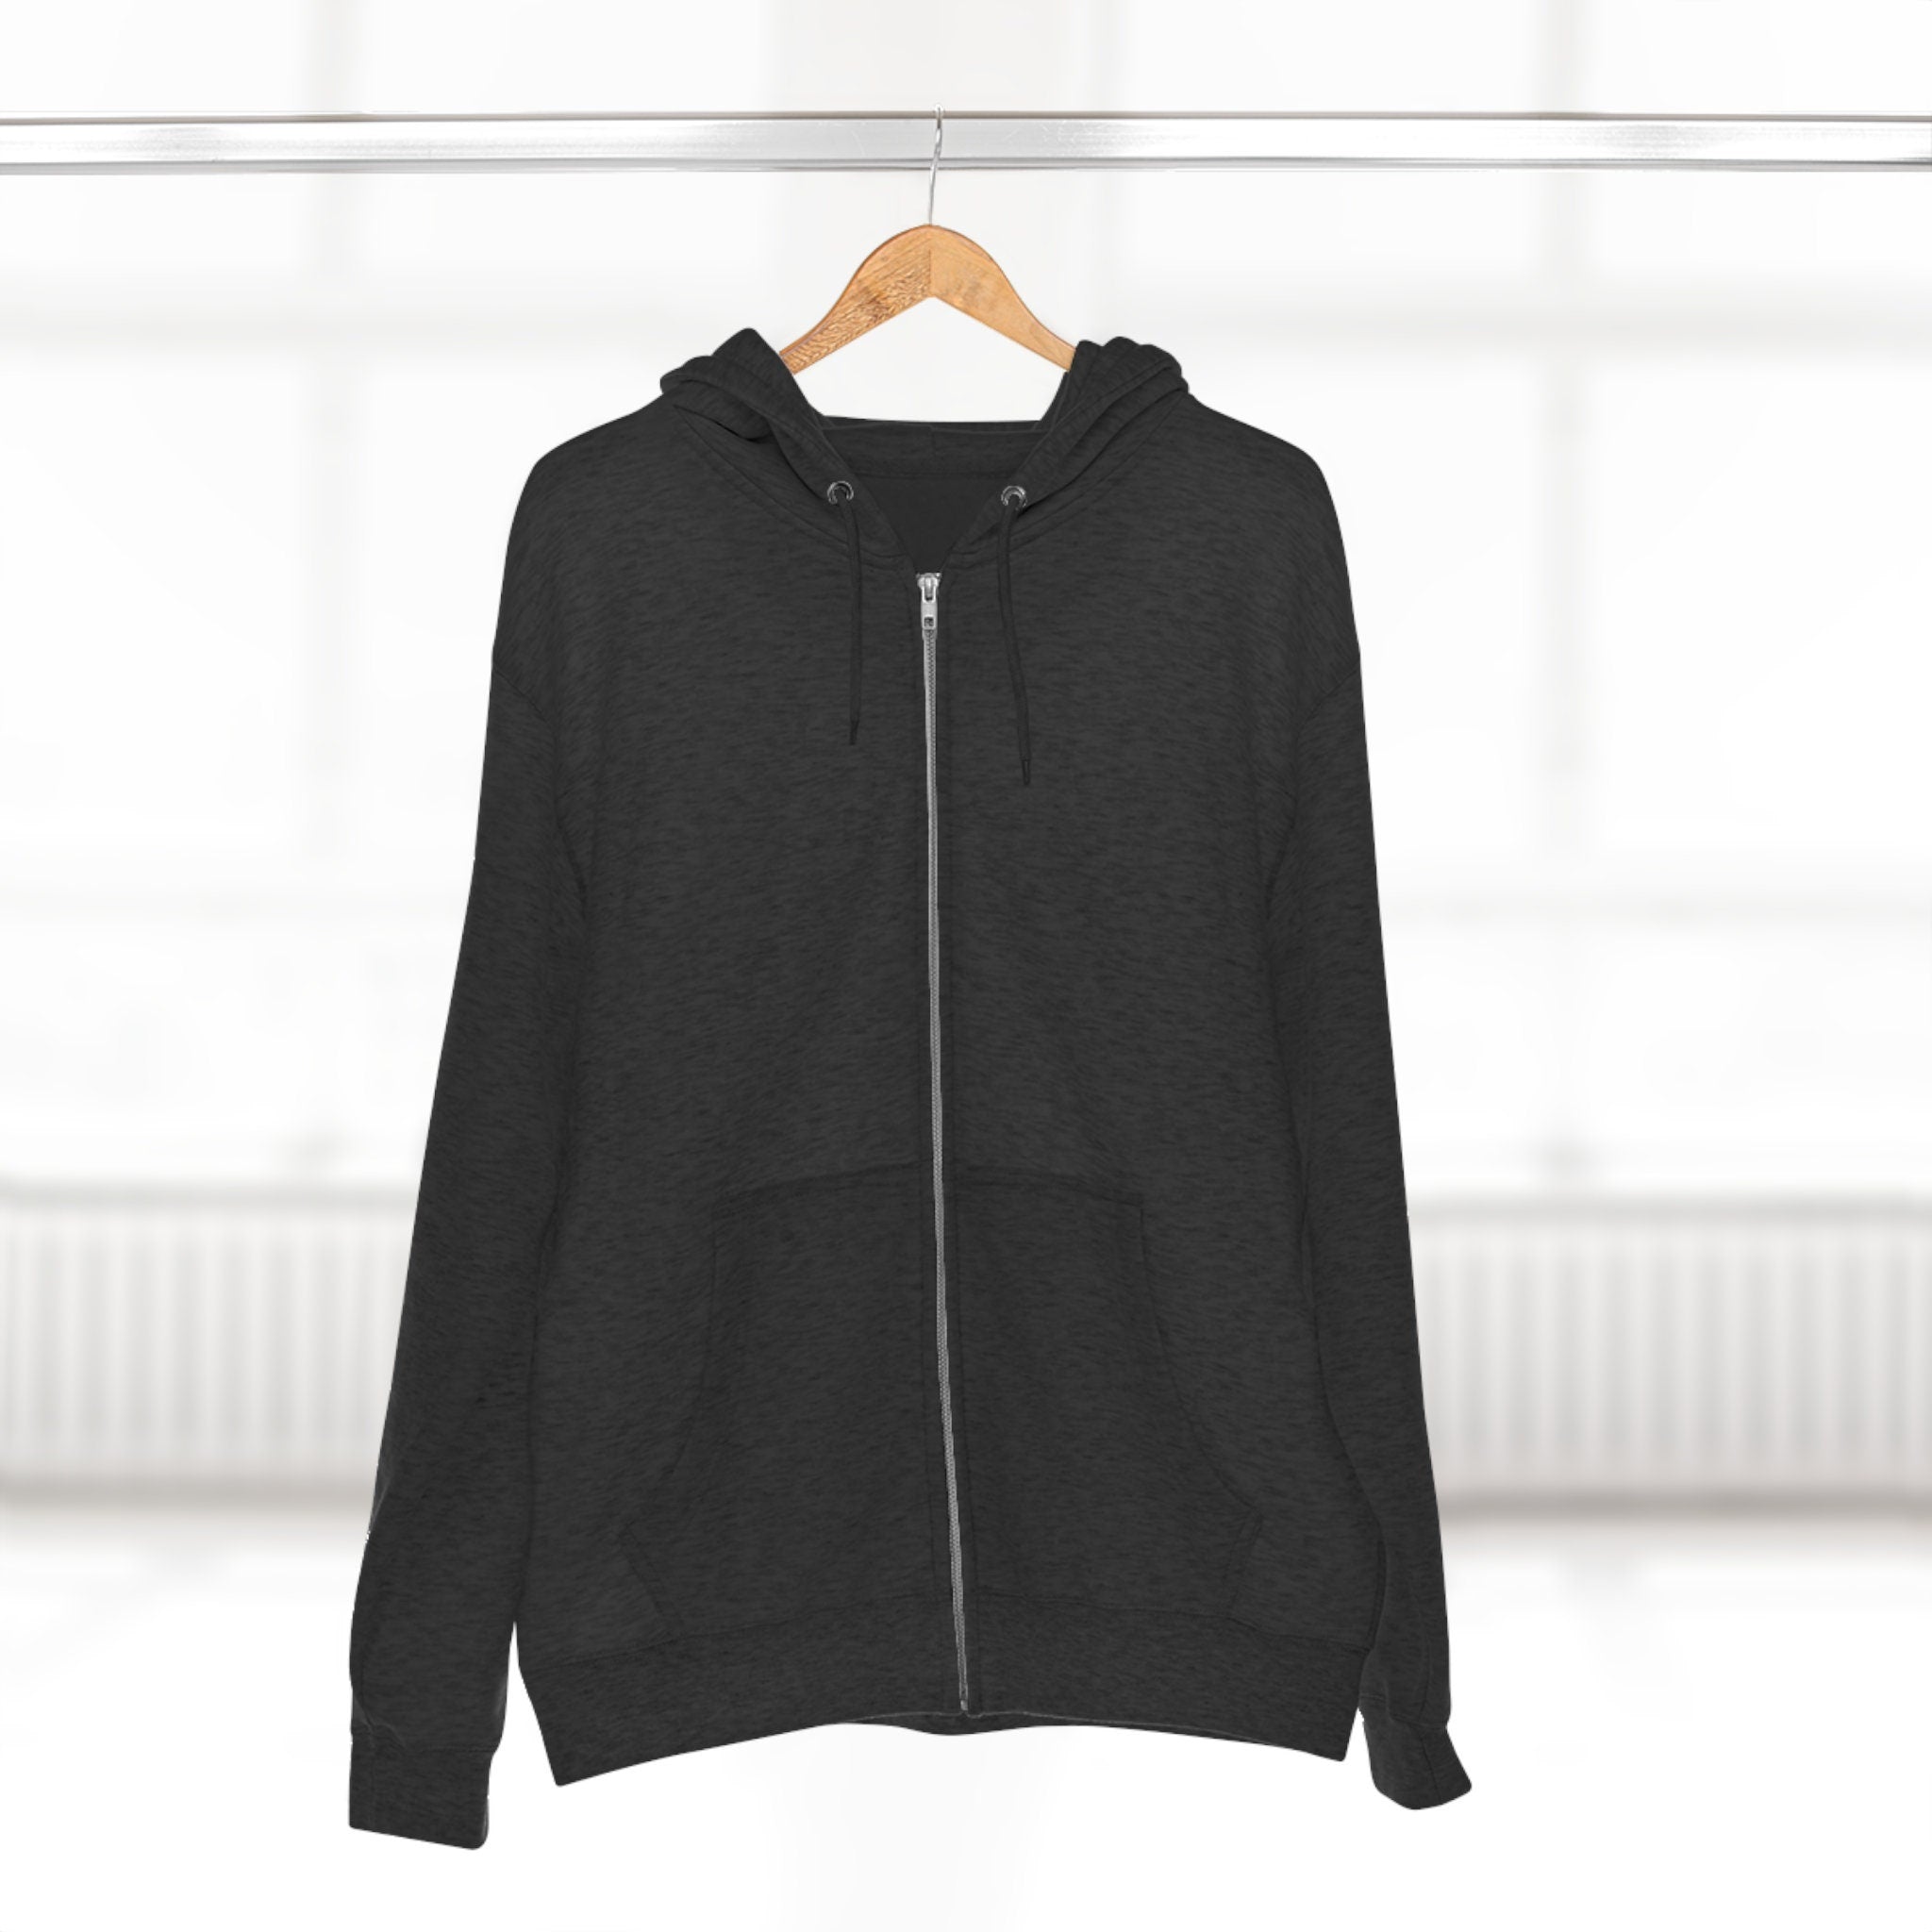 Cool Bunny Graphic Zip-Up Hoodie - MiTo Store